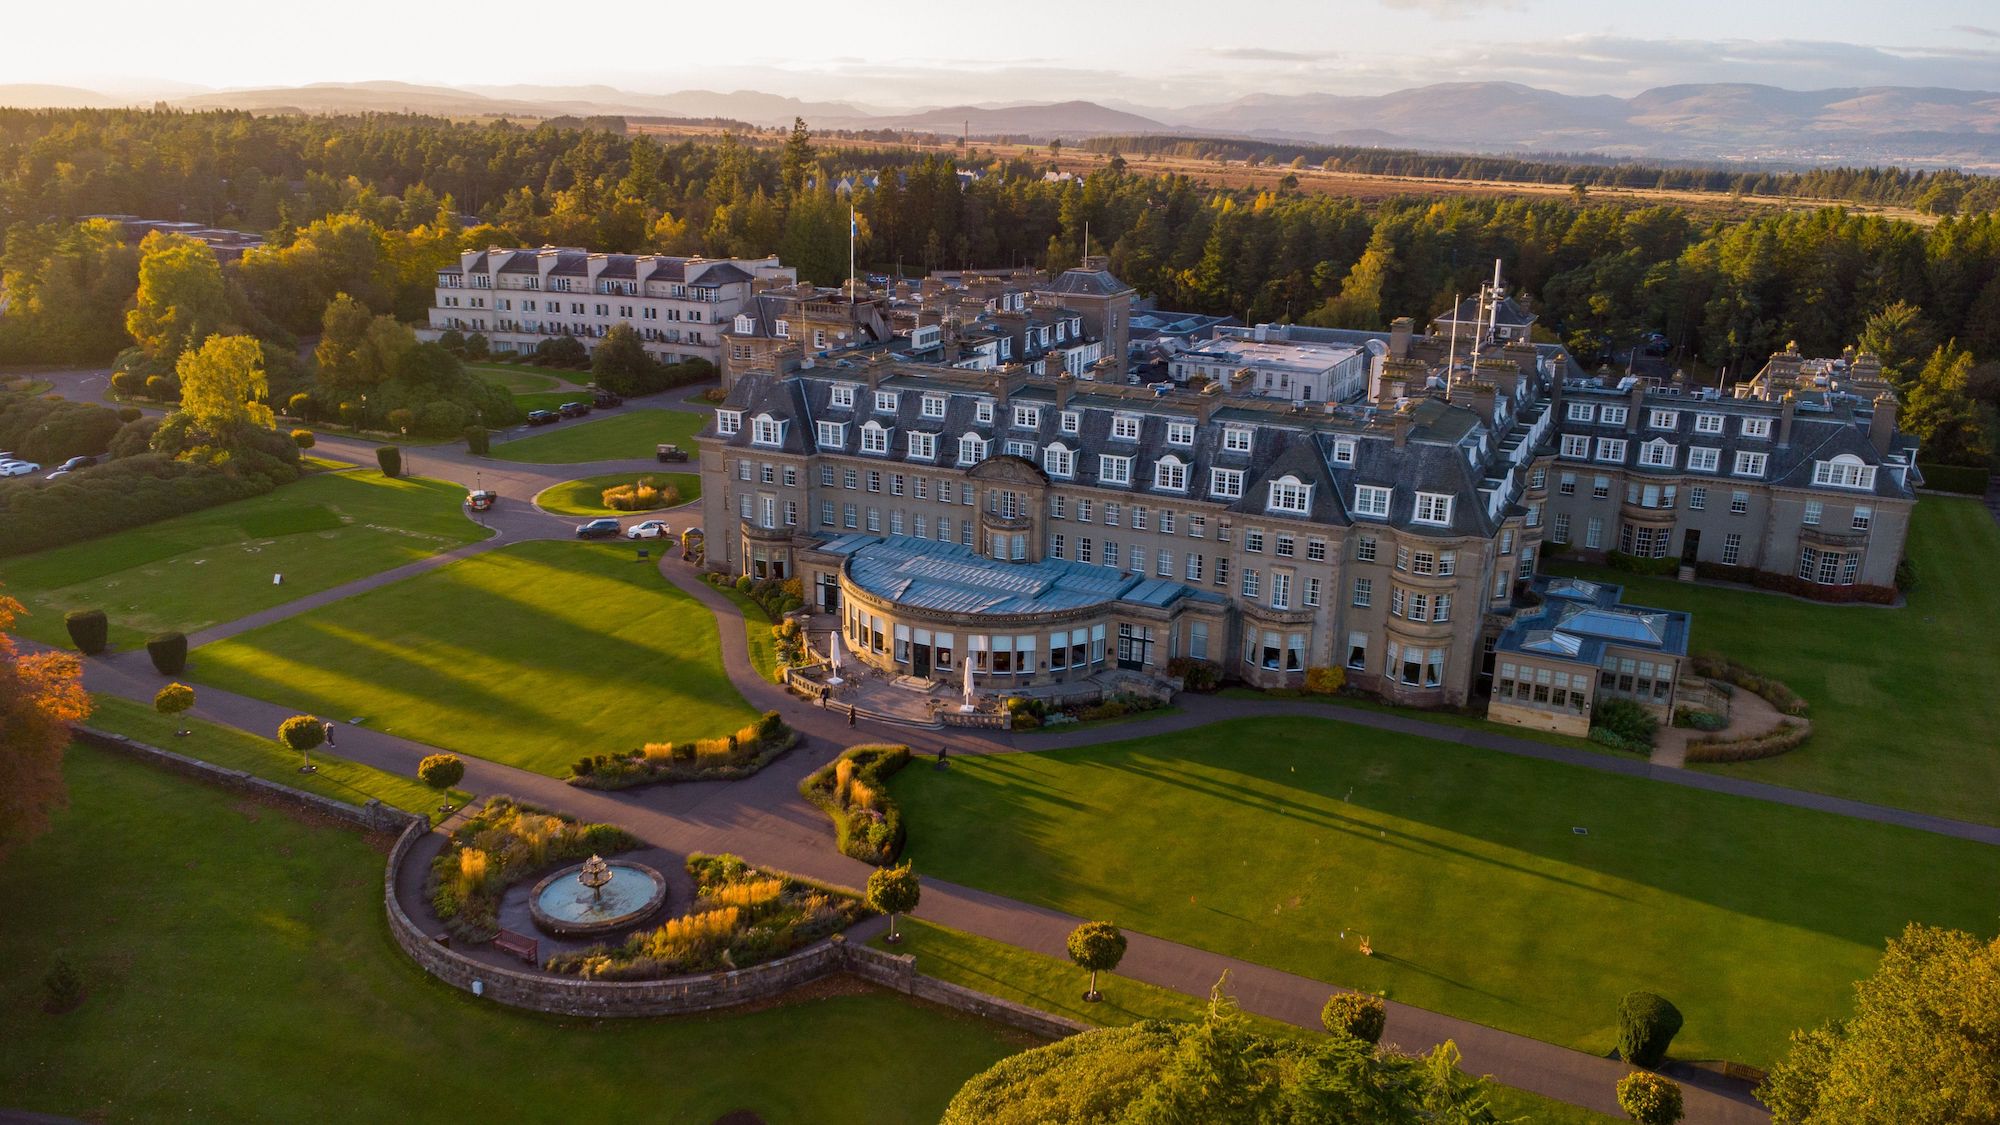 Gleneagles bags top honour at The World’s 50 Best Hotels inaugural awards